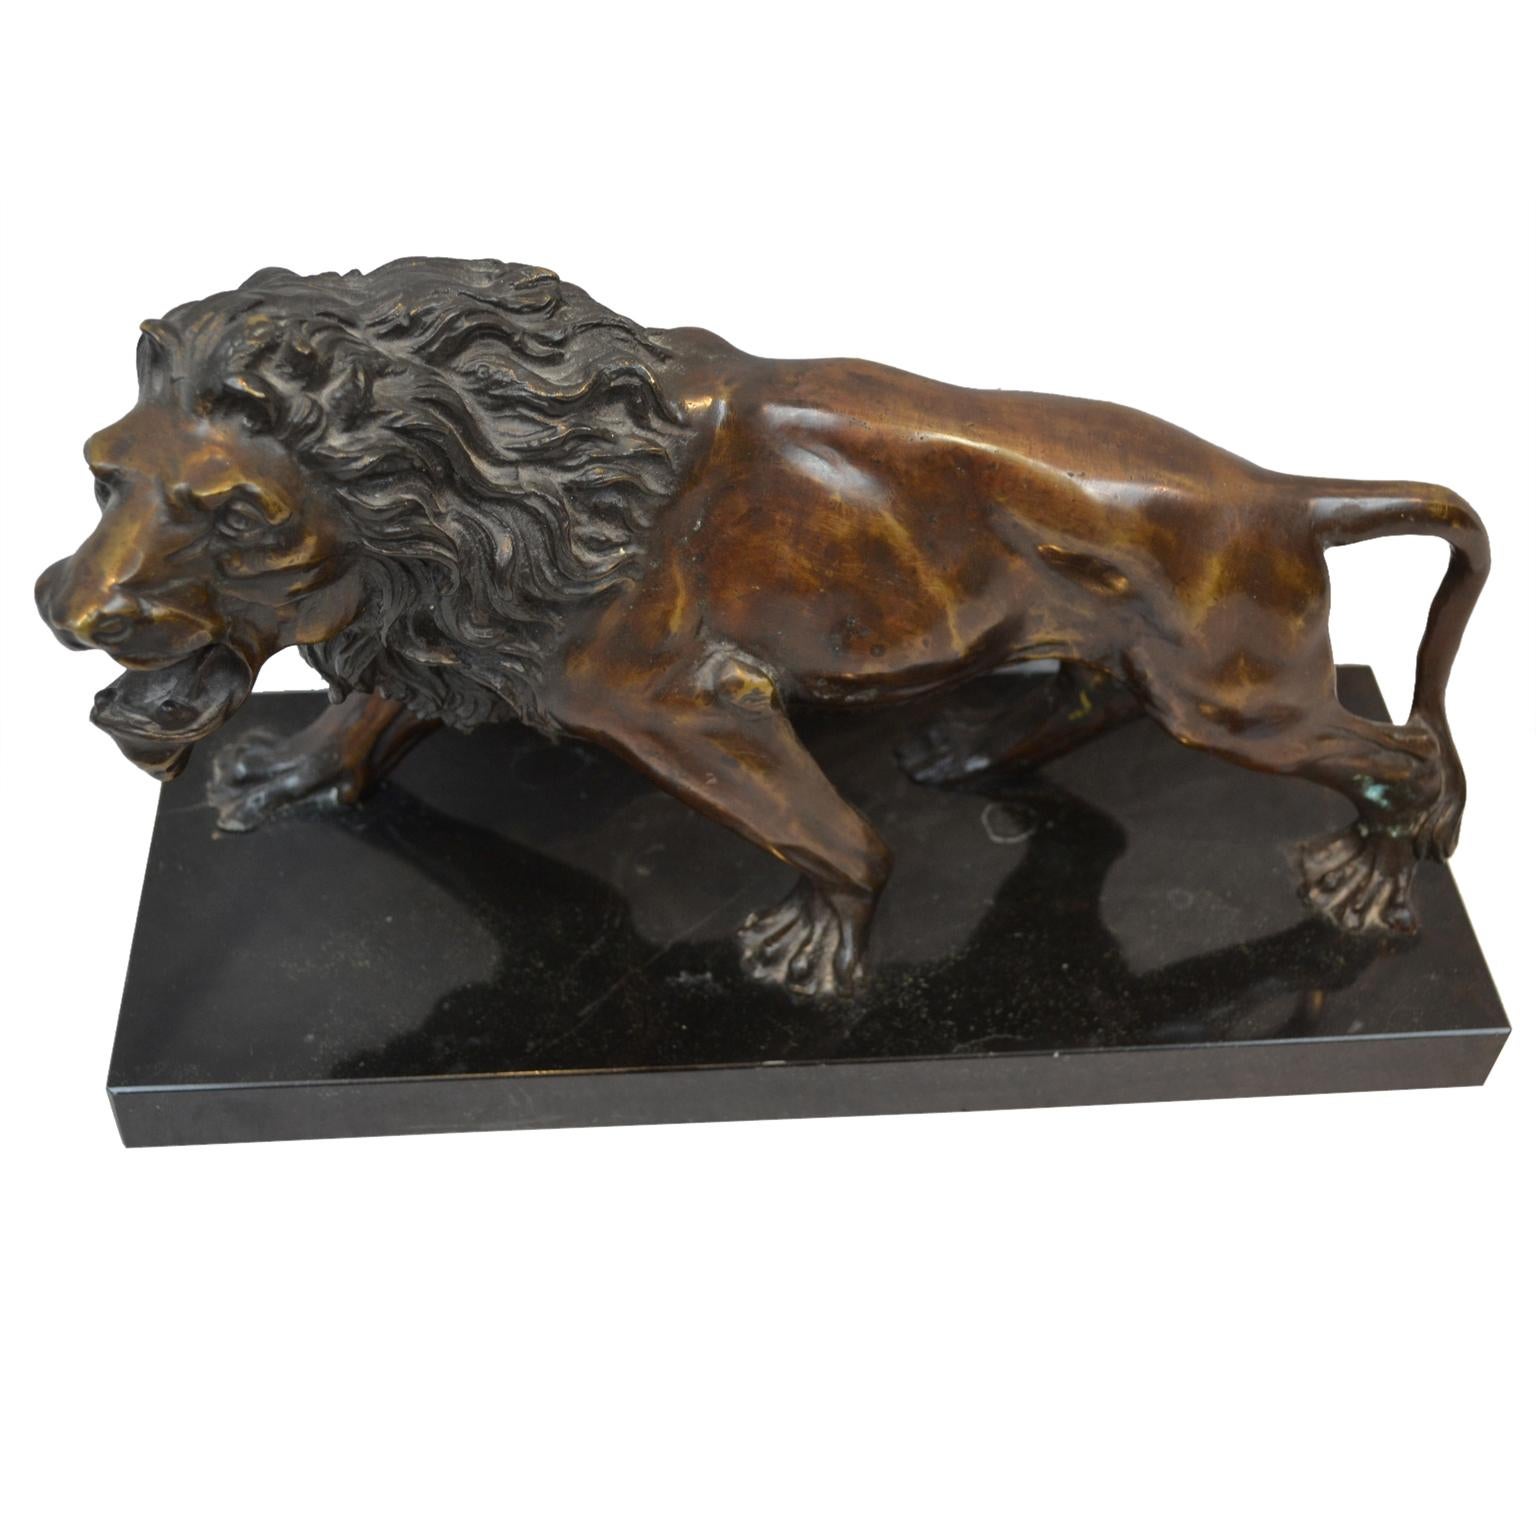 A late 19th century cast bronze of a growling lion in dark brown patinated bronze; unsigned and mounted on a rectangular black marble base.